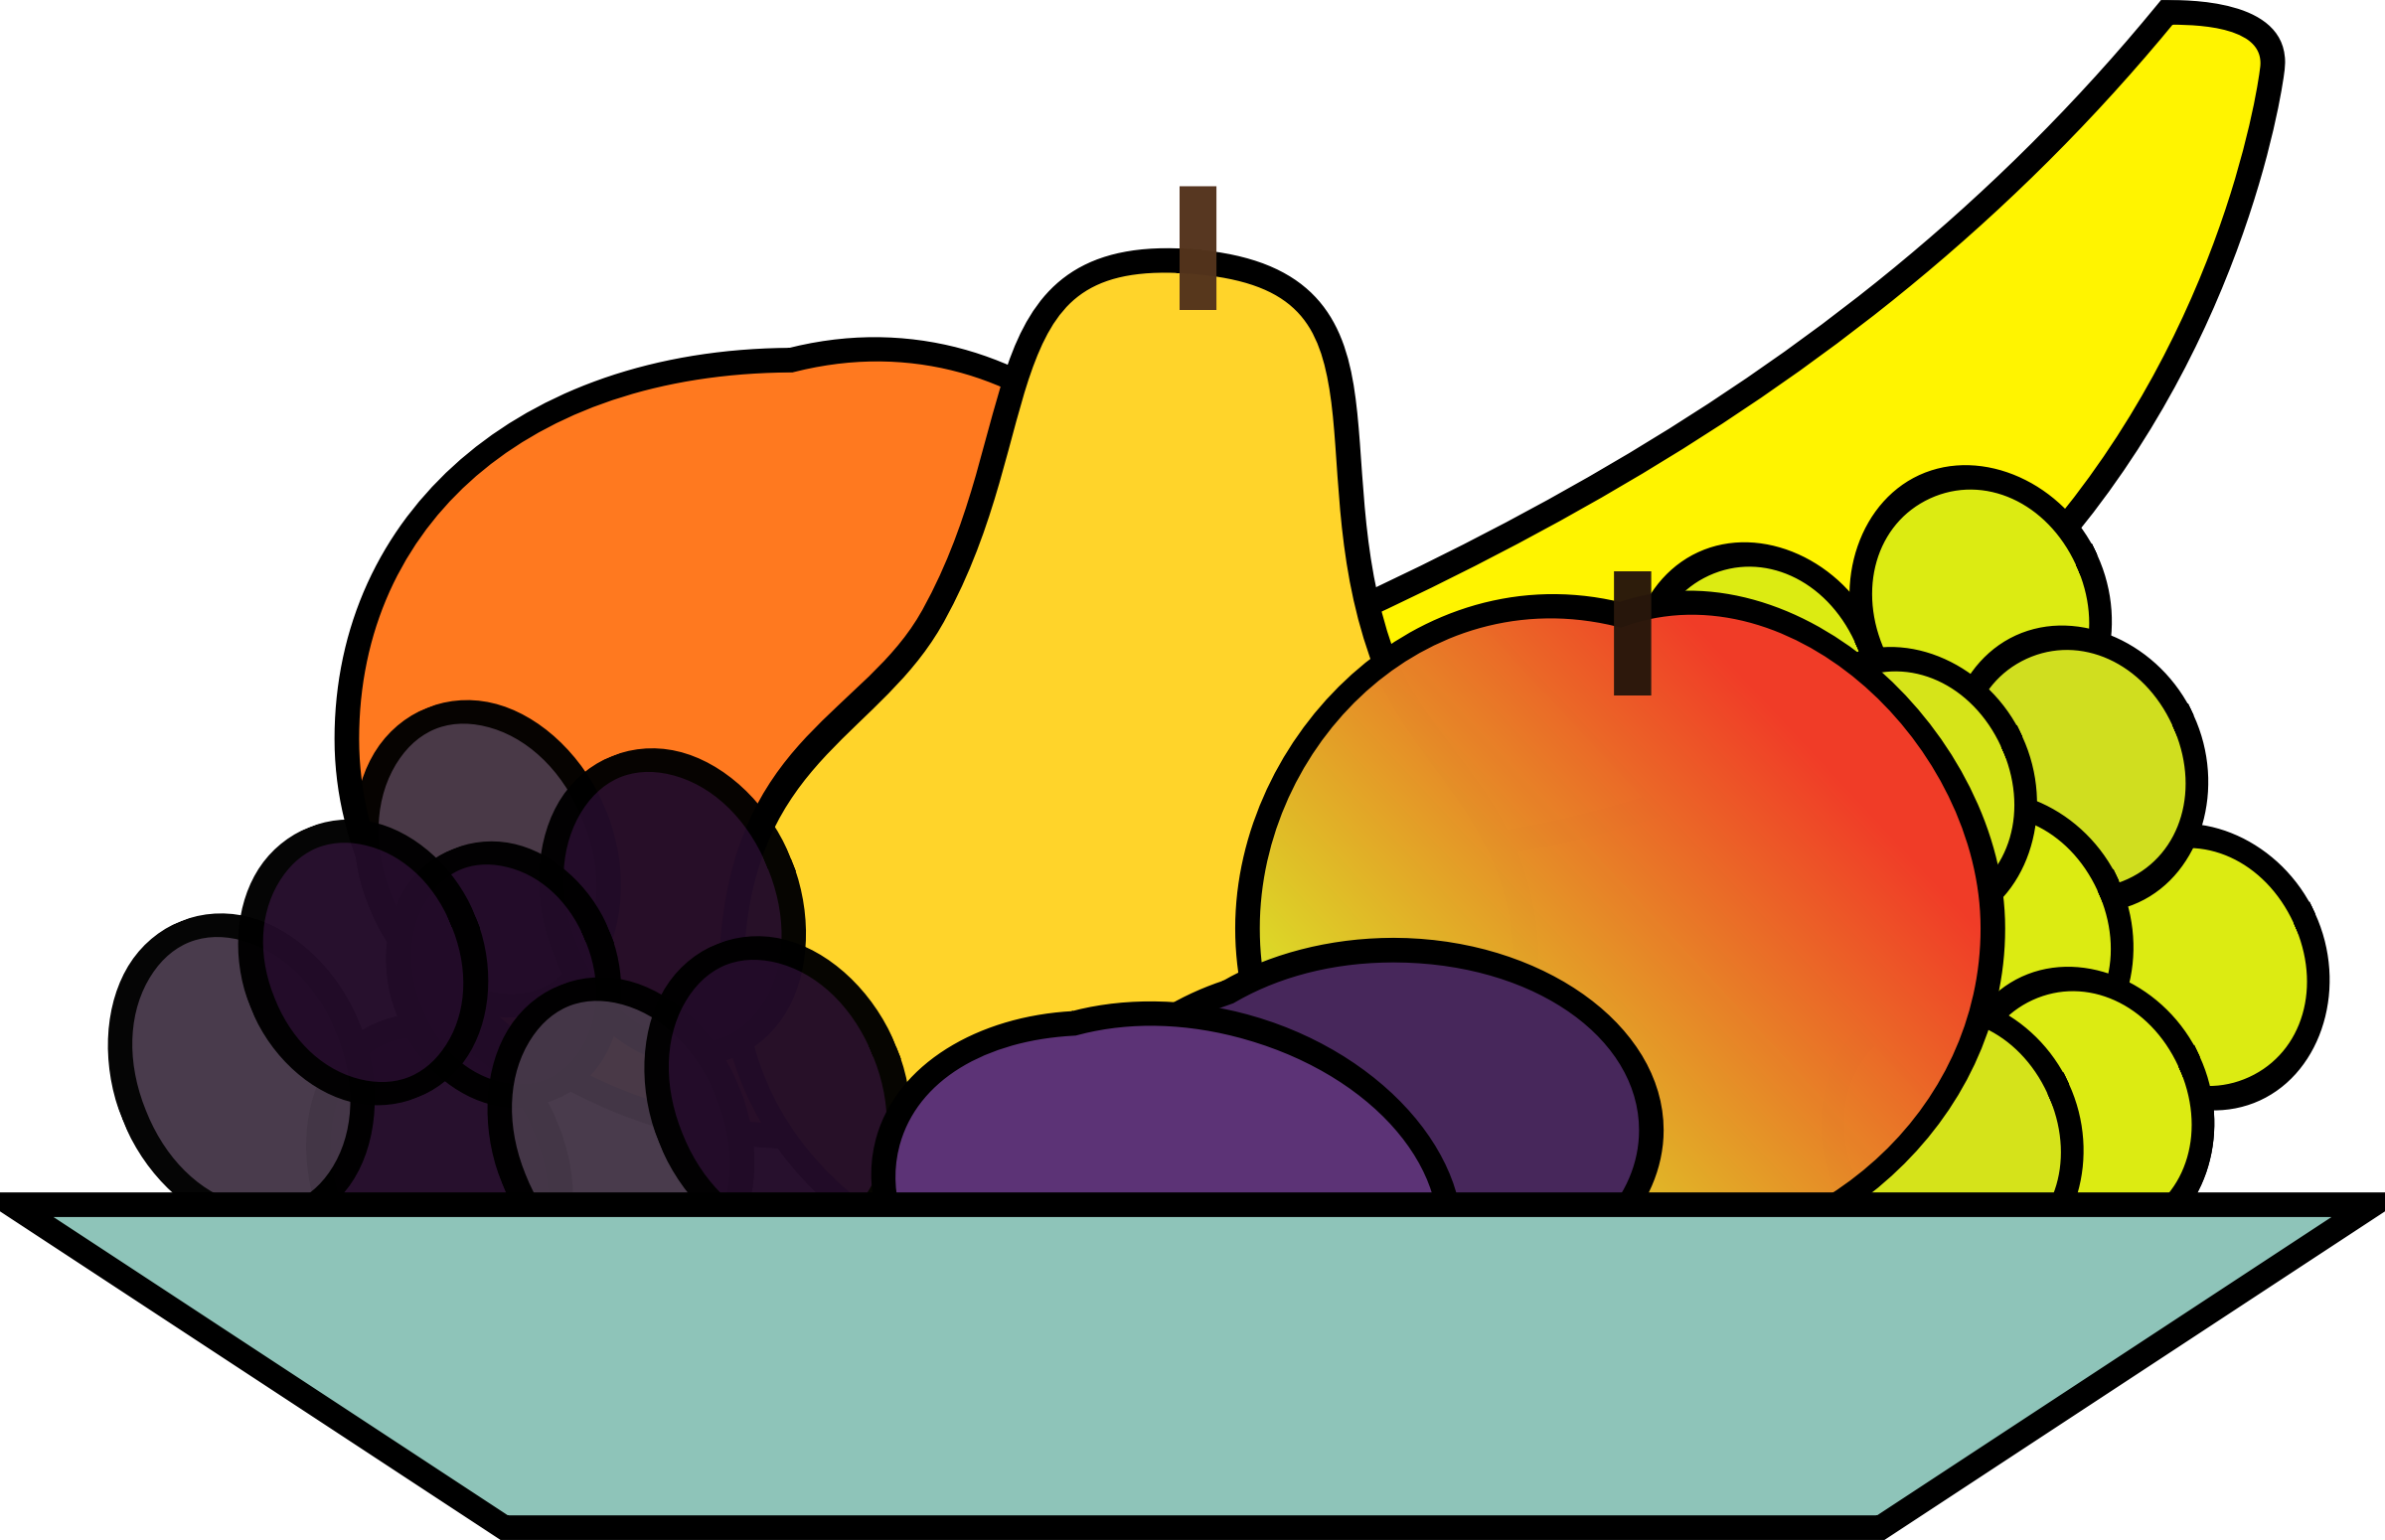 Big plate of food clipart